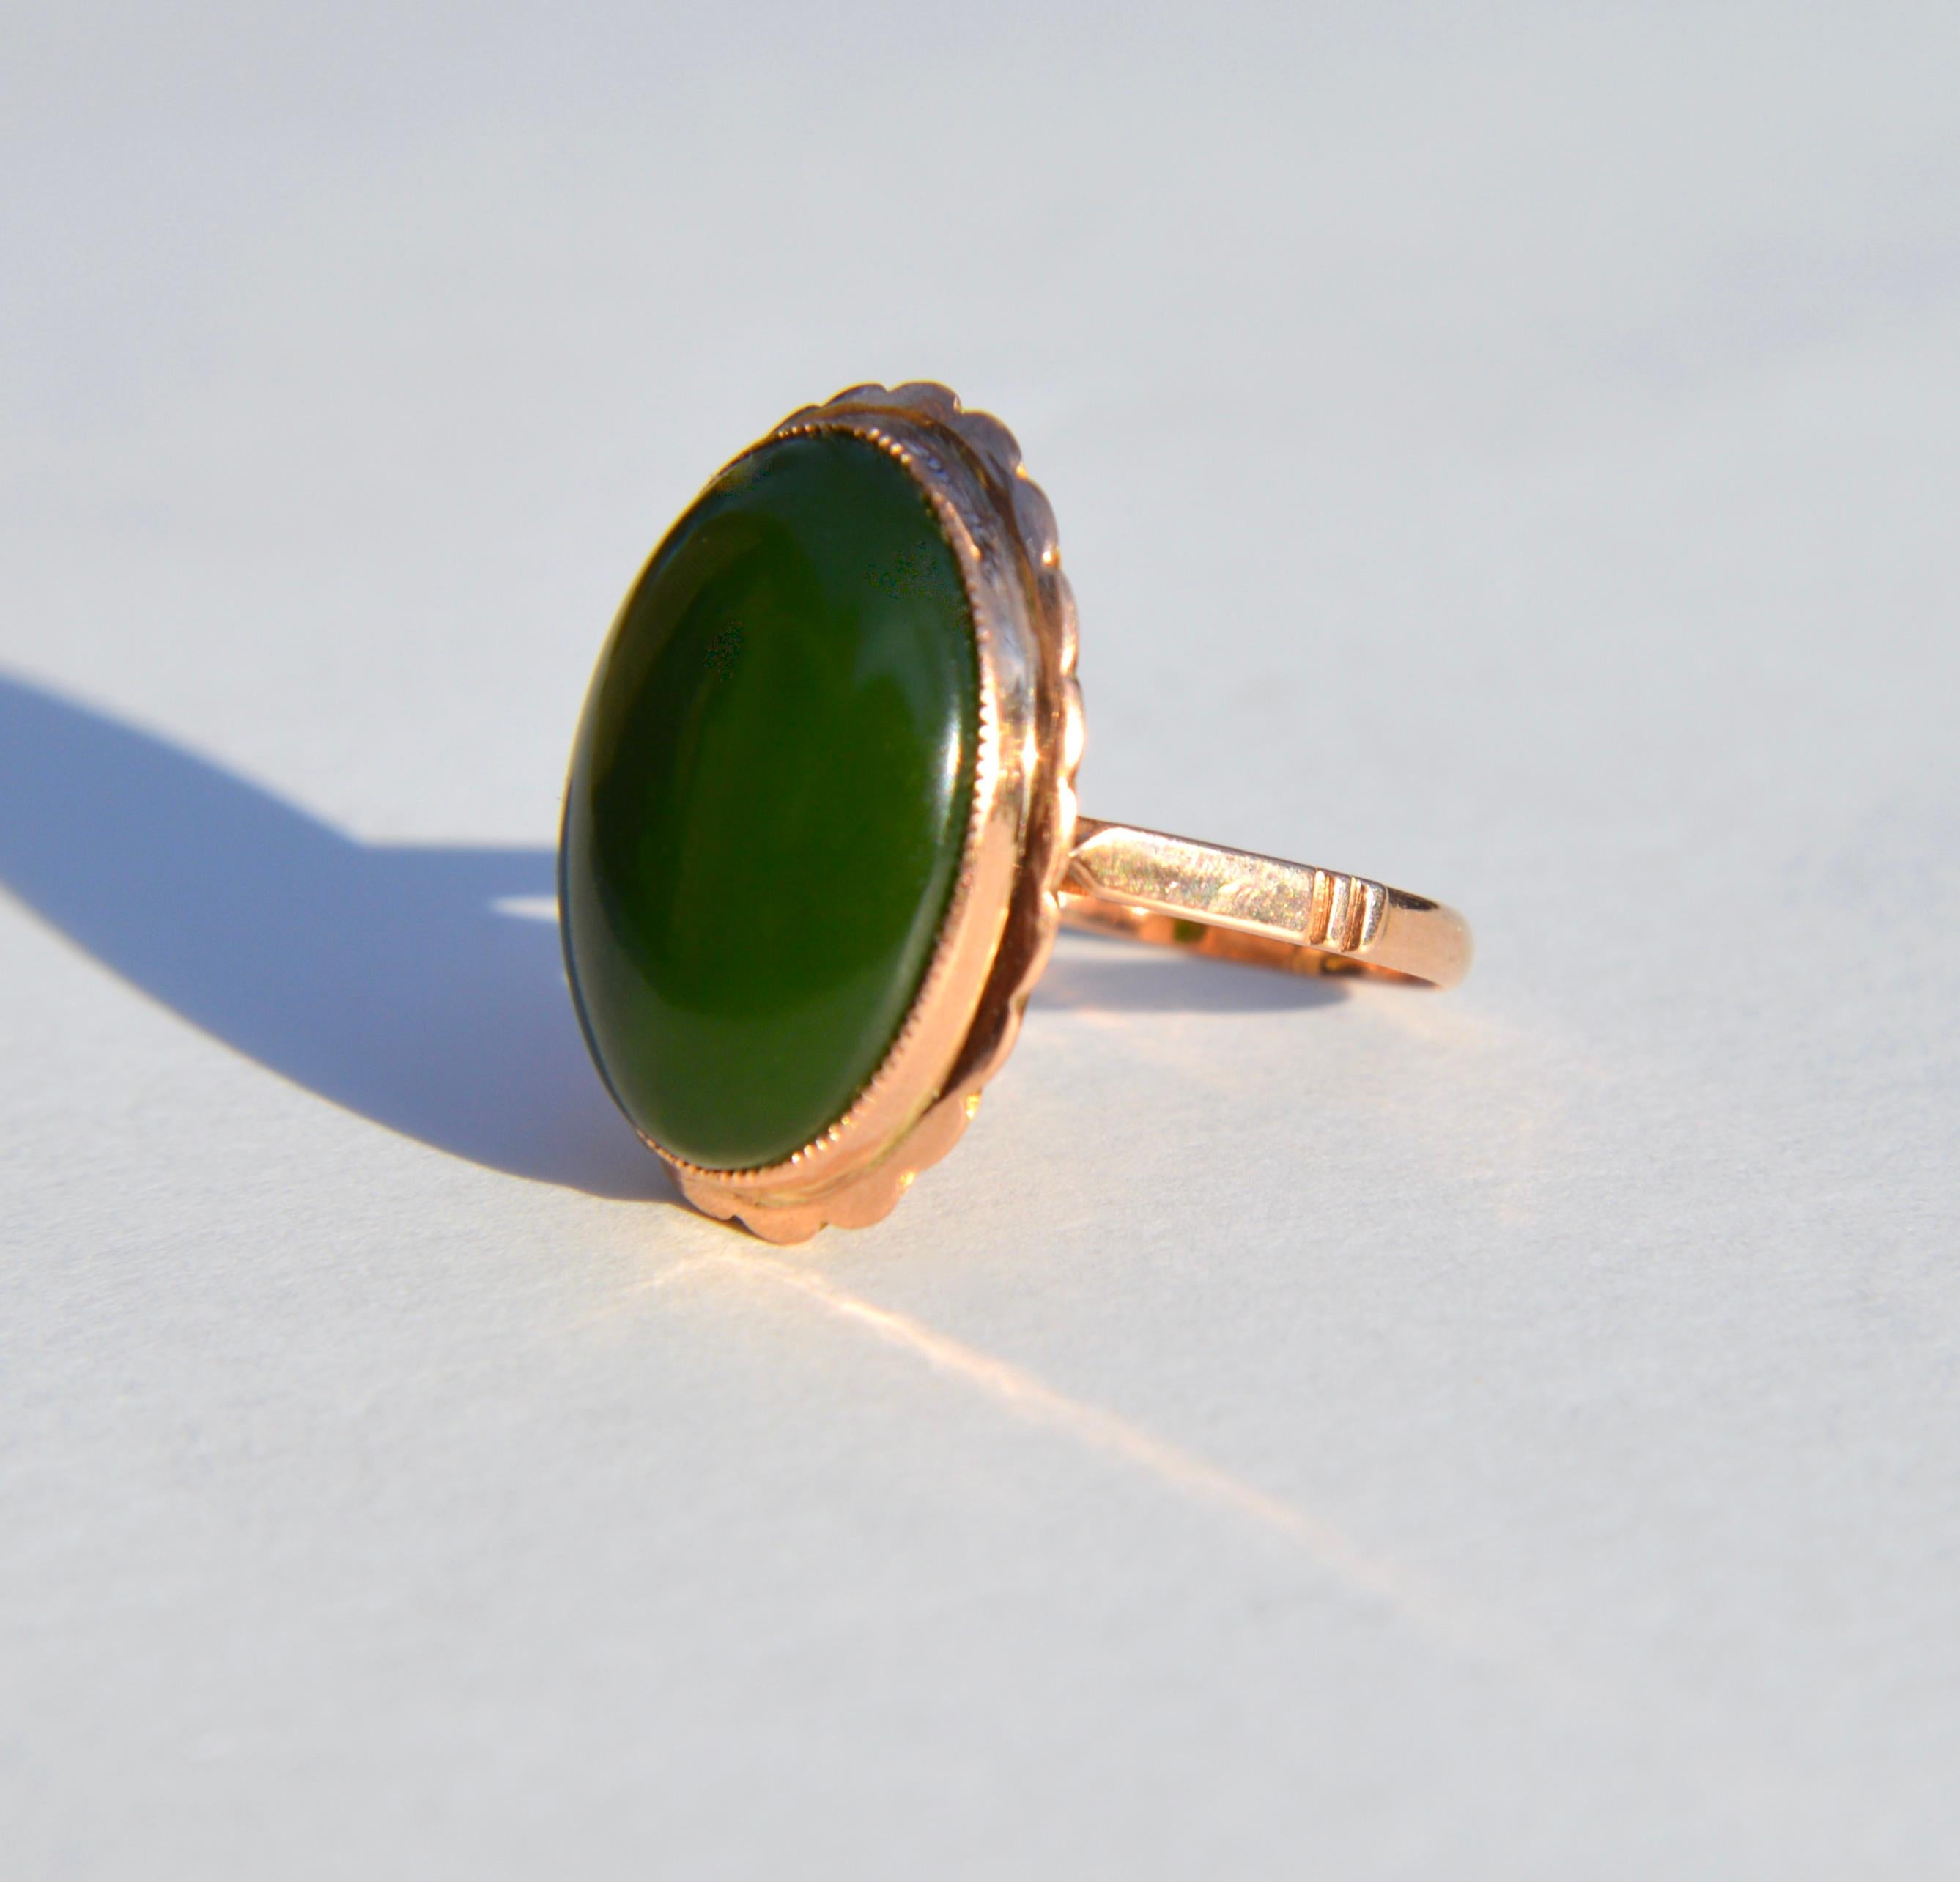 Gorgeous antique vintage Art Deco era circa 1930s nephrite jade 12.86 carat oval cabochon cocktail ring in 14K rose gold. Size 6, can be resized by a jeweler. In very good condition. no visible wear to the stone. Jade stone is a beautiful deep